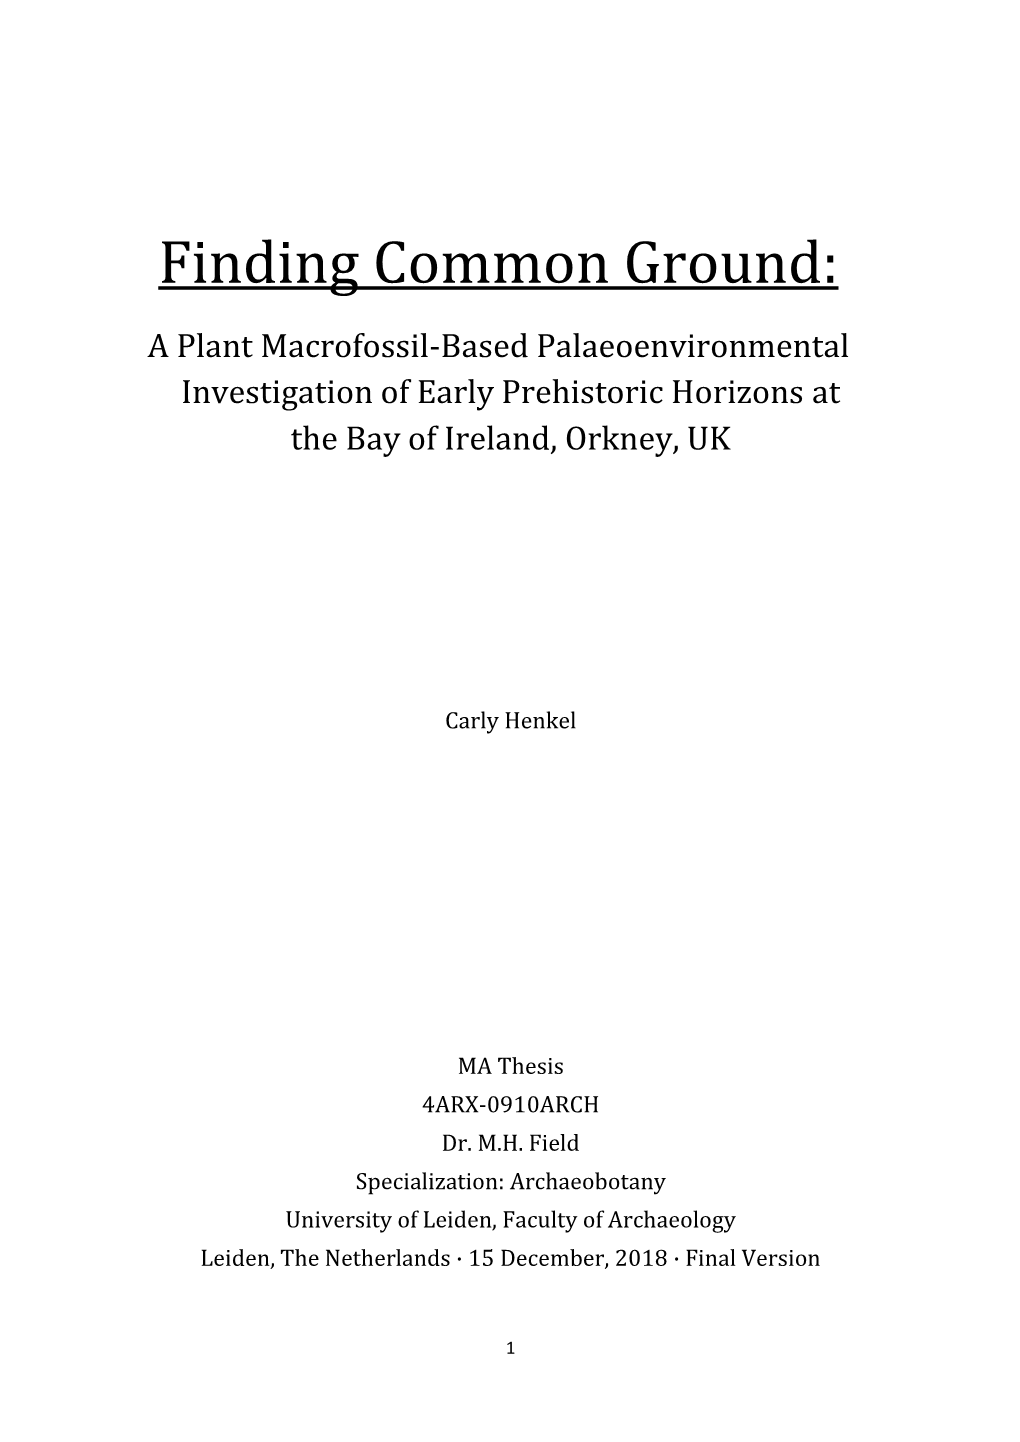 Finding Common Ground: a Plant Macrofossil-Based Palaeoenvironmental Investigation of Early Prehistoric Horizons at the Bay of Ireland, Orkney, UK